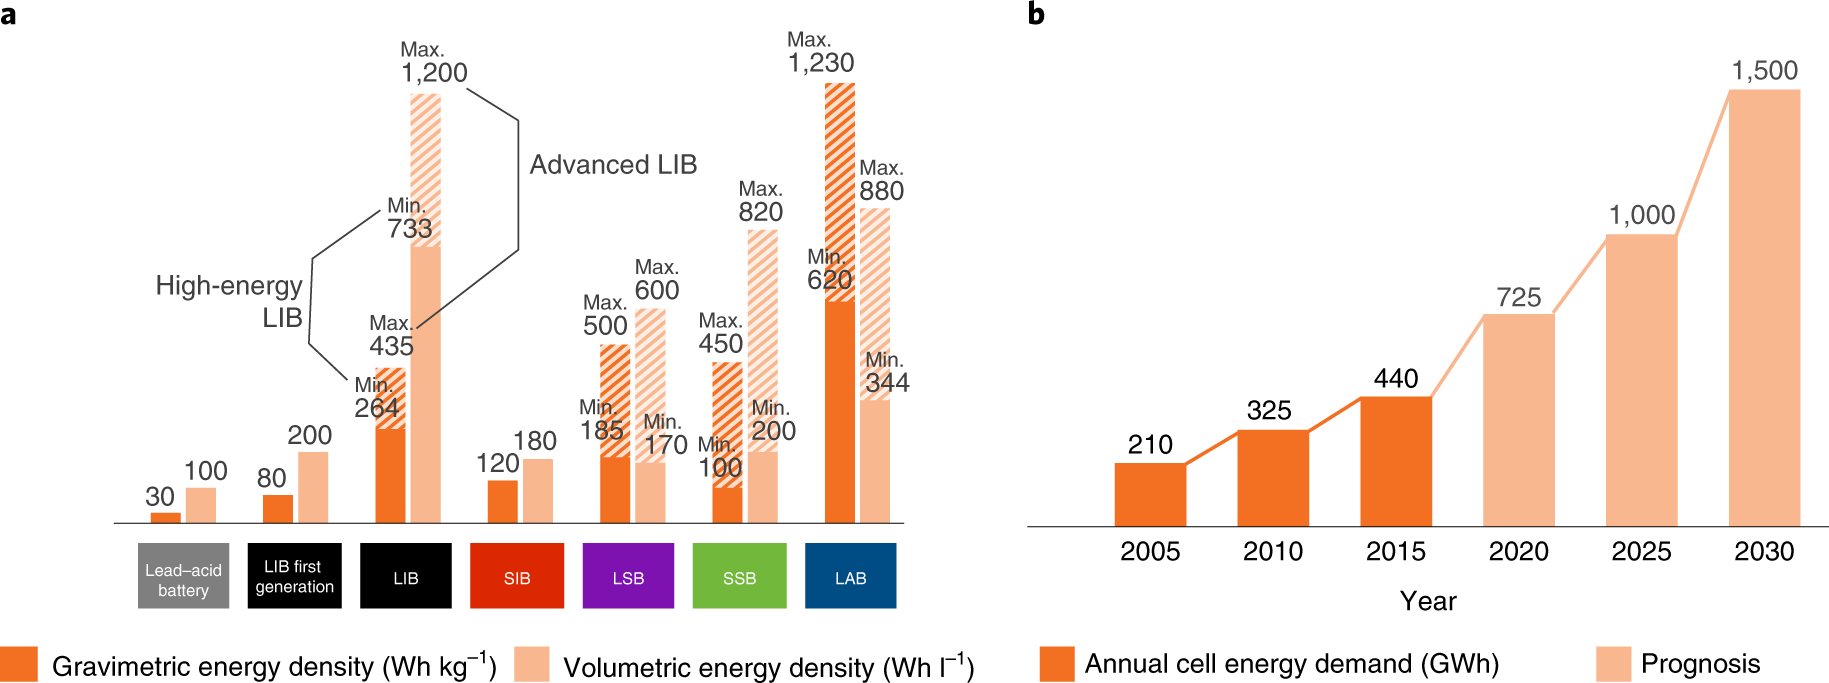 Post-lithium-ion battery cell production and its compatibility with lithium- ion cell production infrastructure | Nature Energy